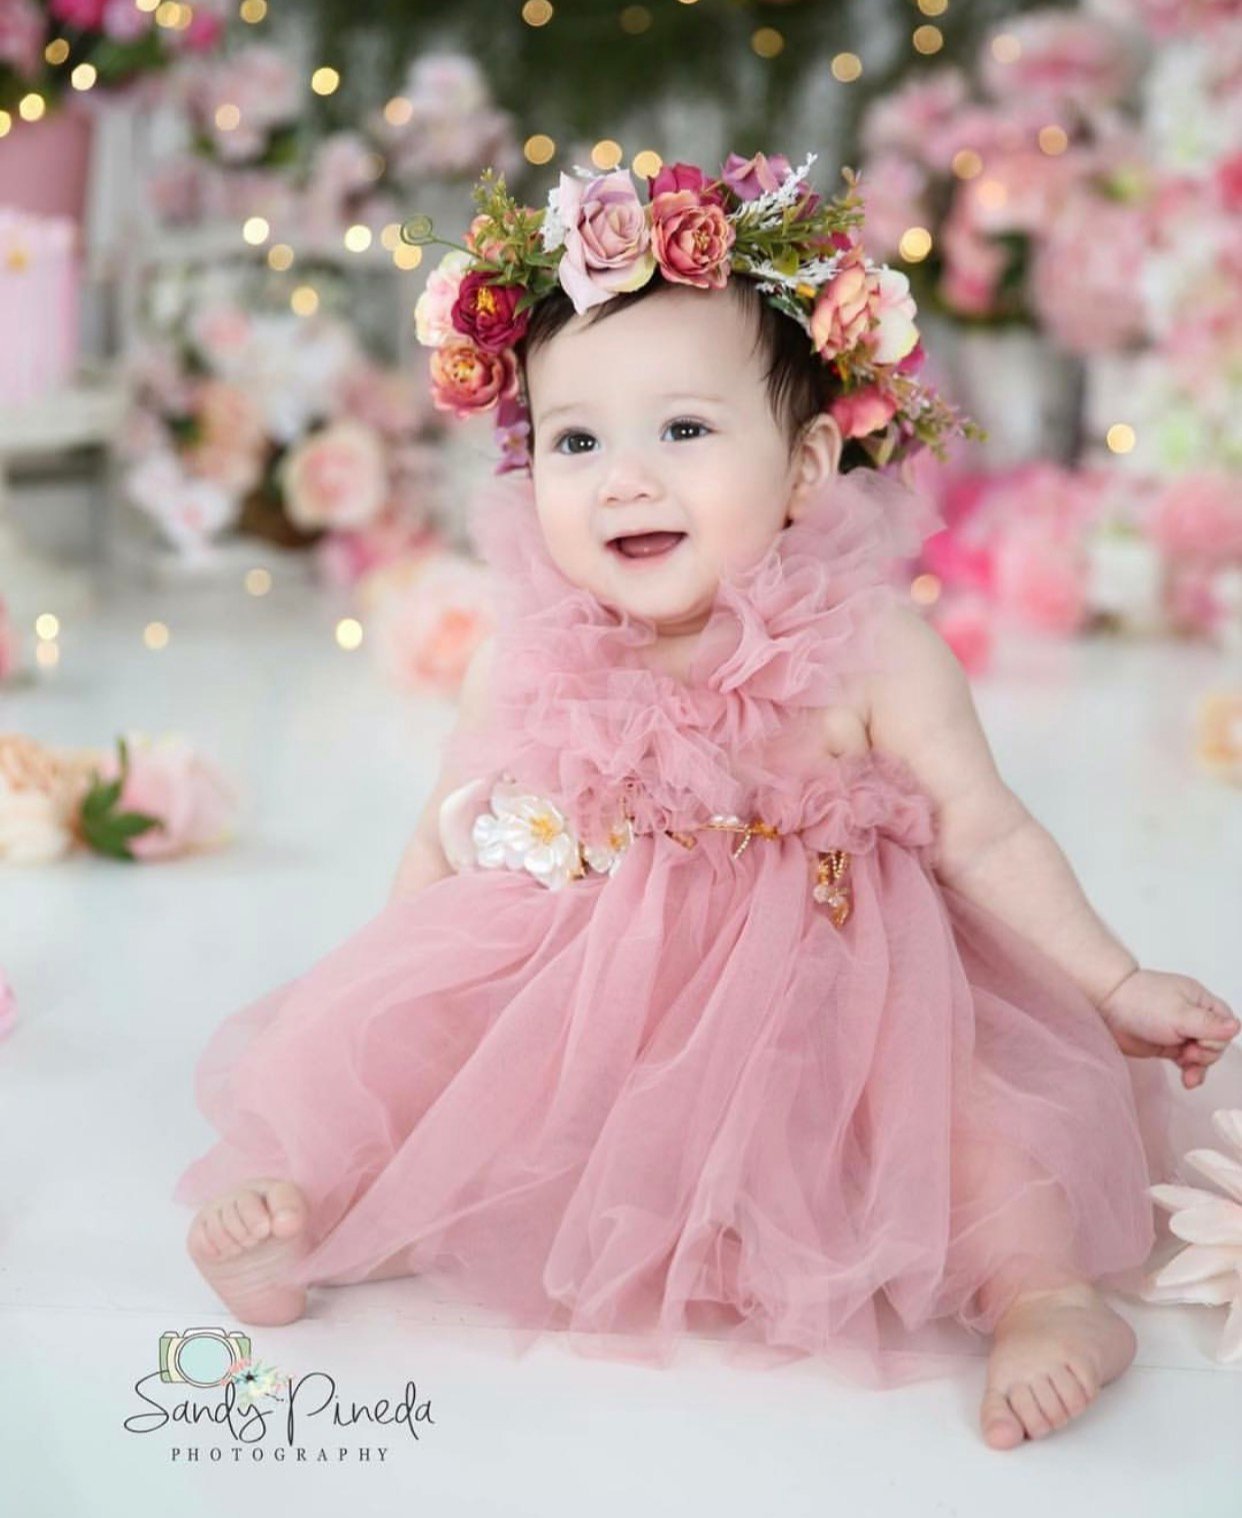 Best 60th Birthday Party Entertainment Ideas of 2022 – The Birthday Best |  Baby girl birthday dress, Birthday girl dress, Baby photoshoot girl